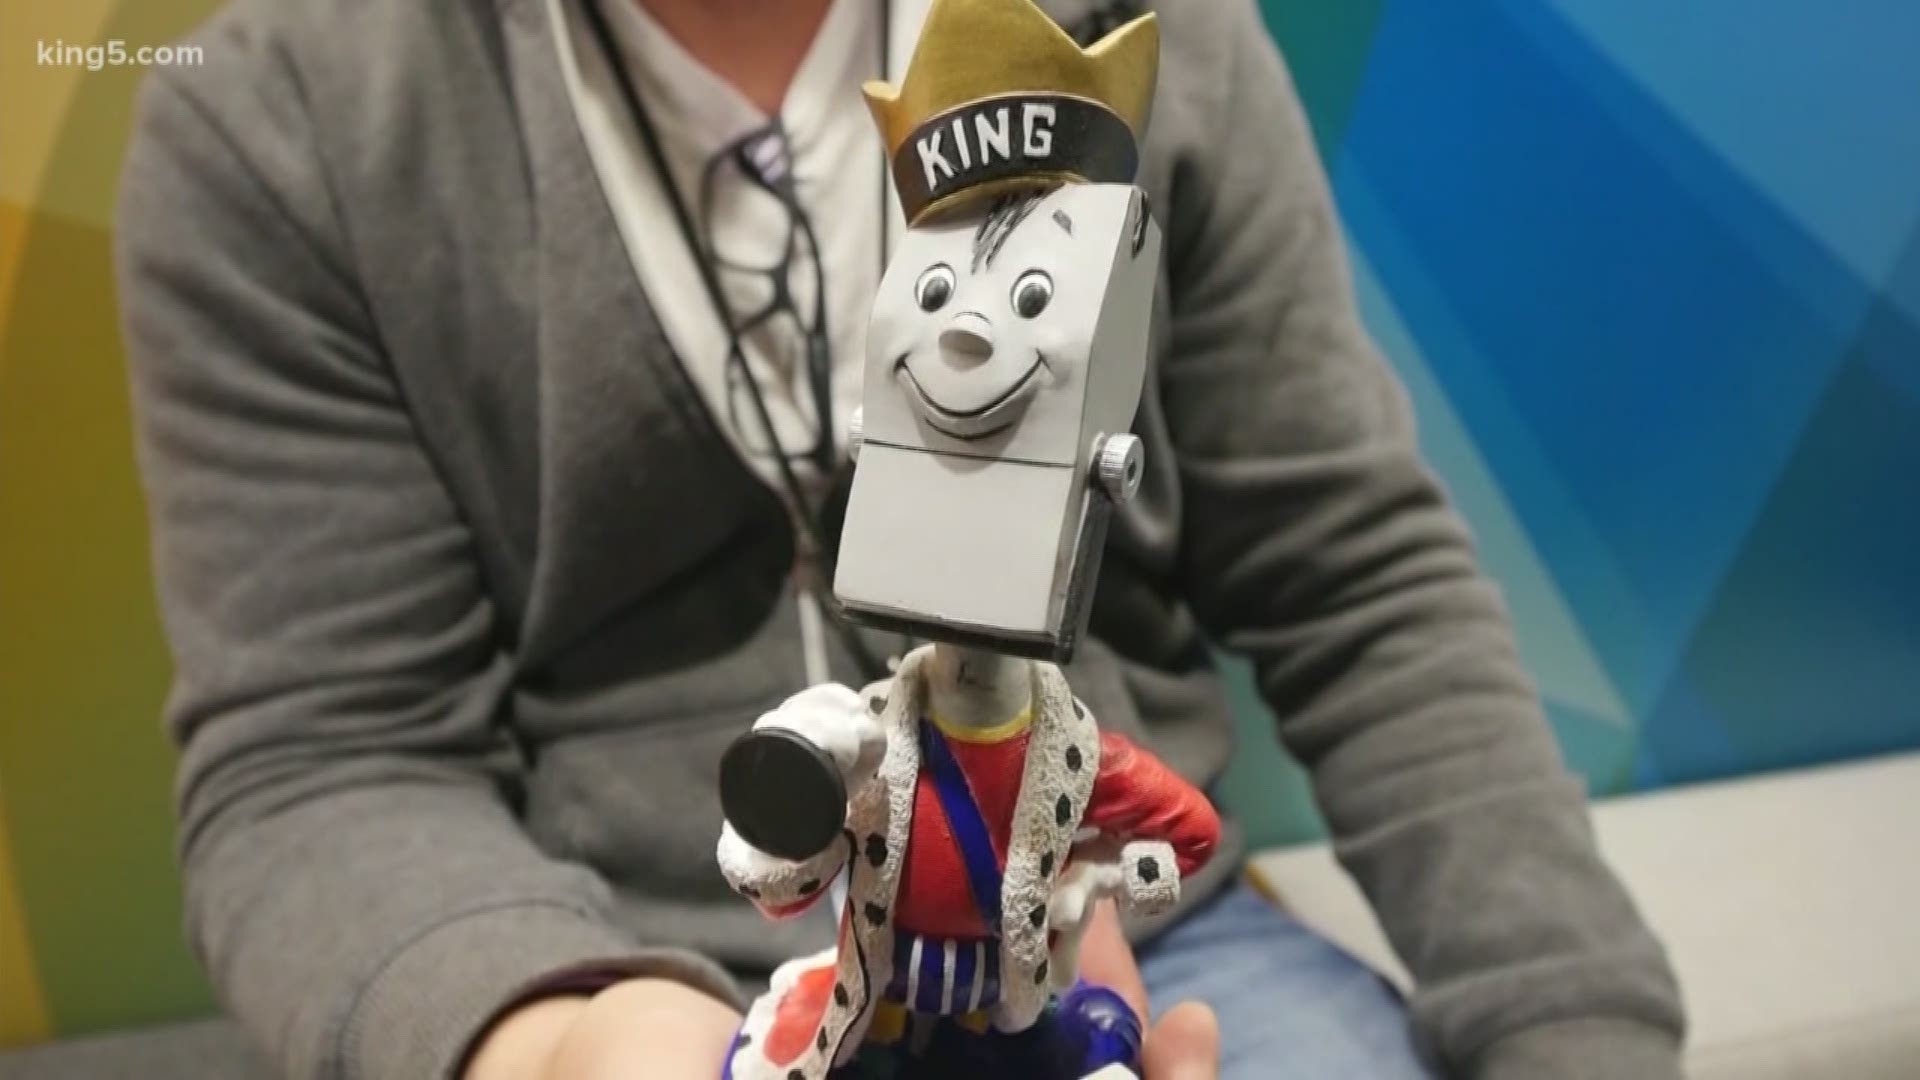 KING 5 mascot King Mike is a Disney creation